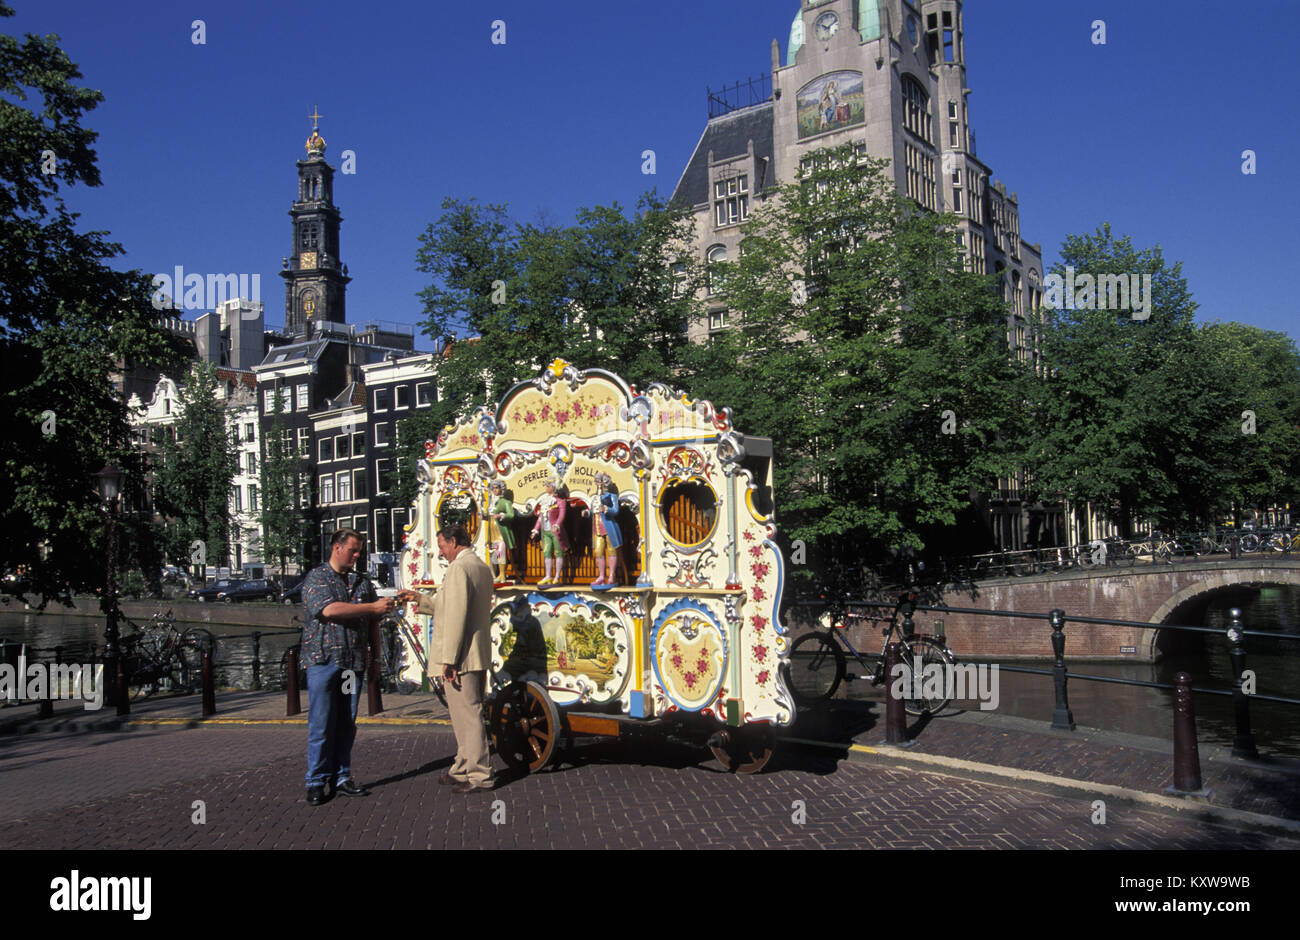 The Netherlands. Amsterdam. Street organ called De drie pruiken, built in 1905. Organist collecting money from passer-by. Stock Photo